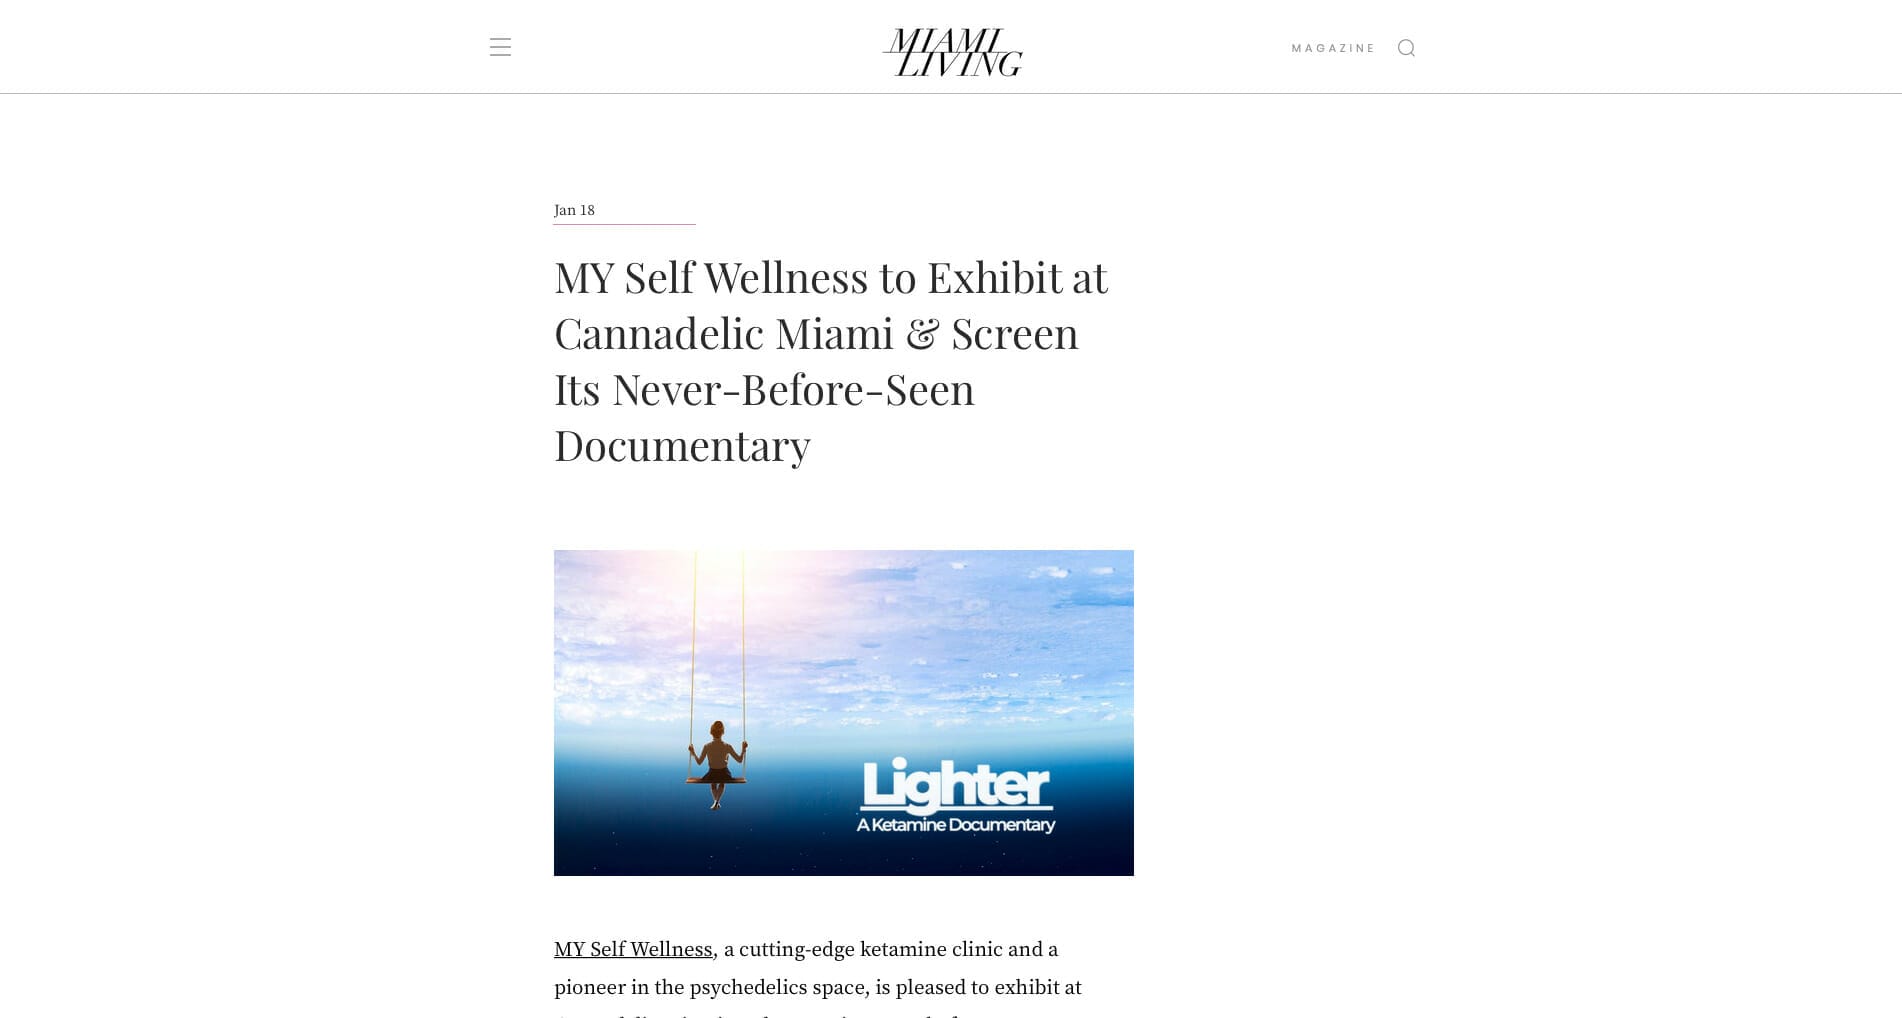 MY Self Wellness to Exhibit at Cannadelic Miami & Screen Its Never-Before-Seen Documentary